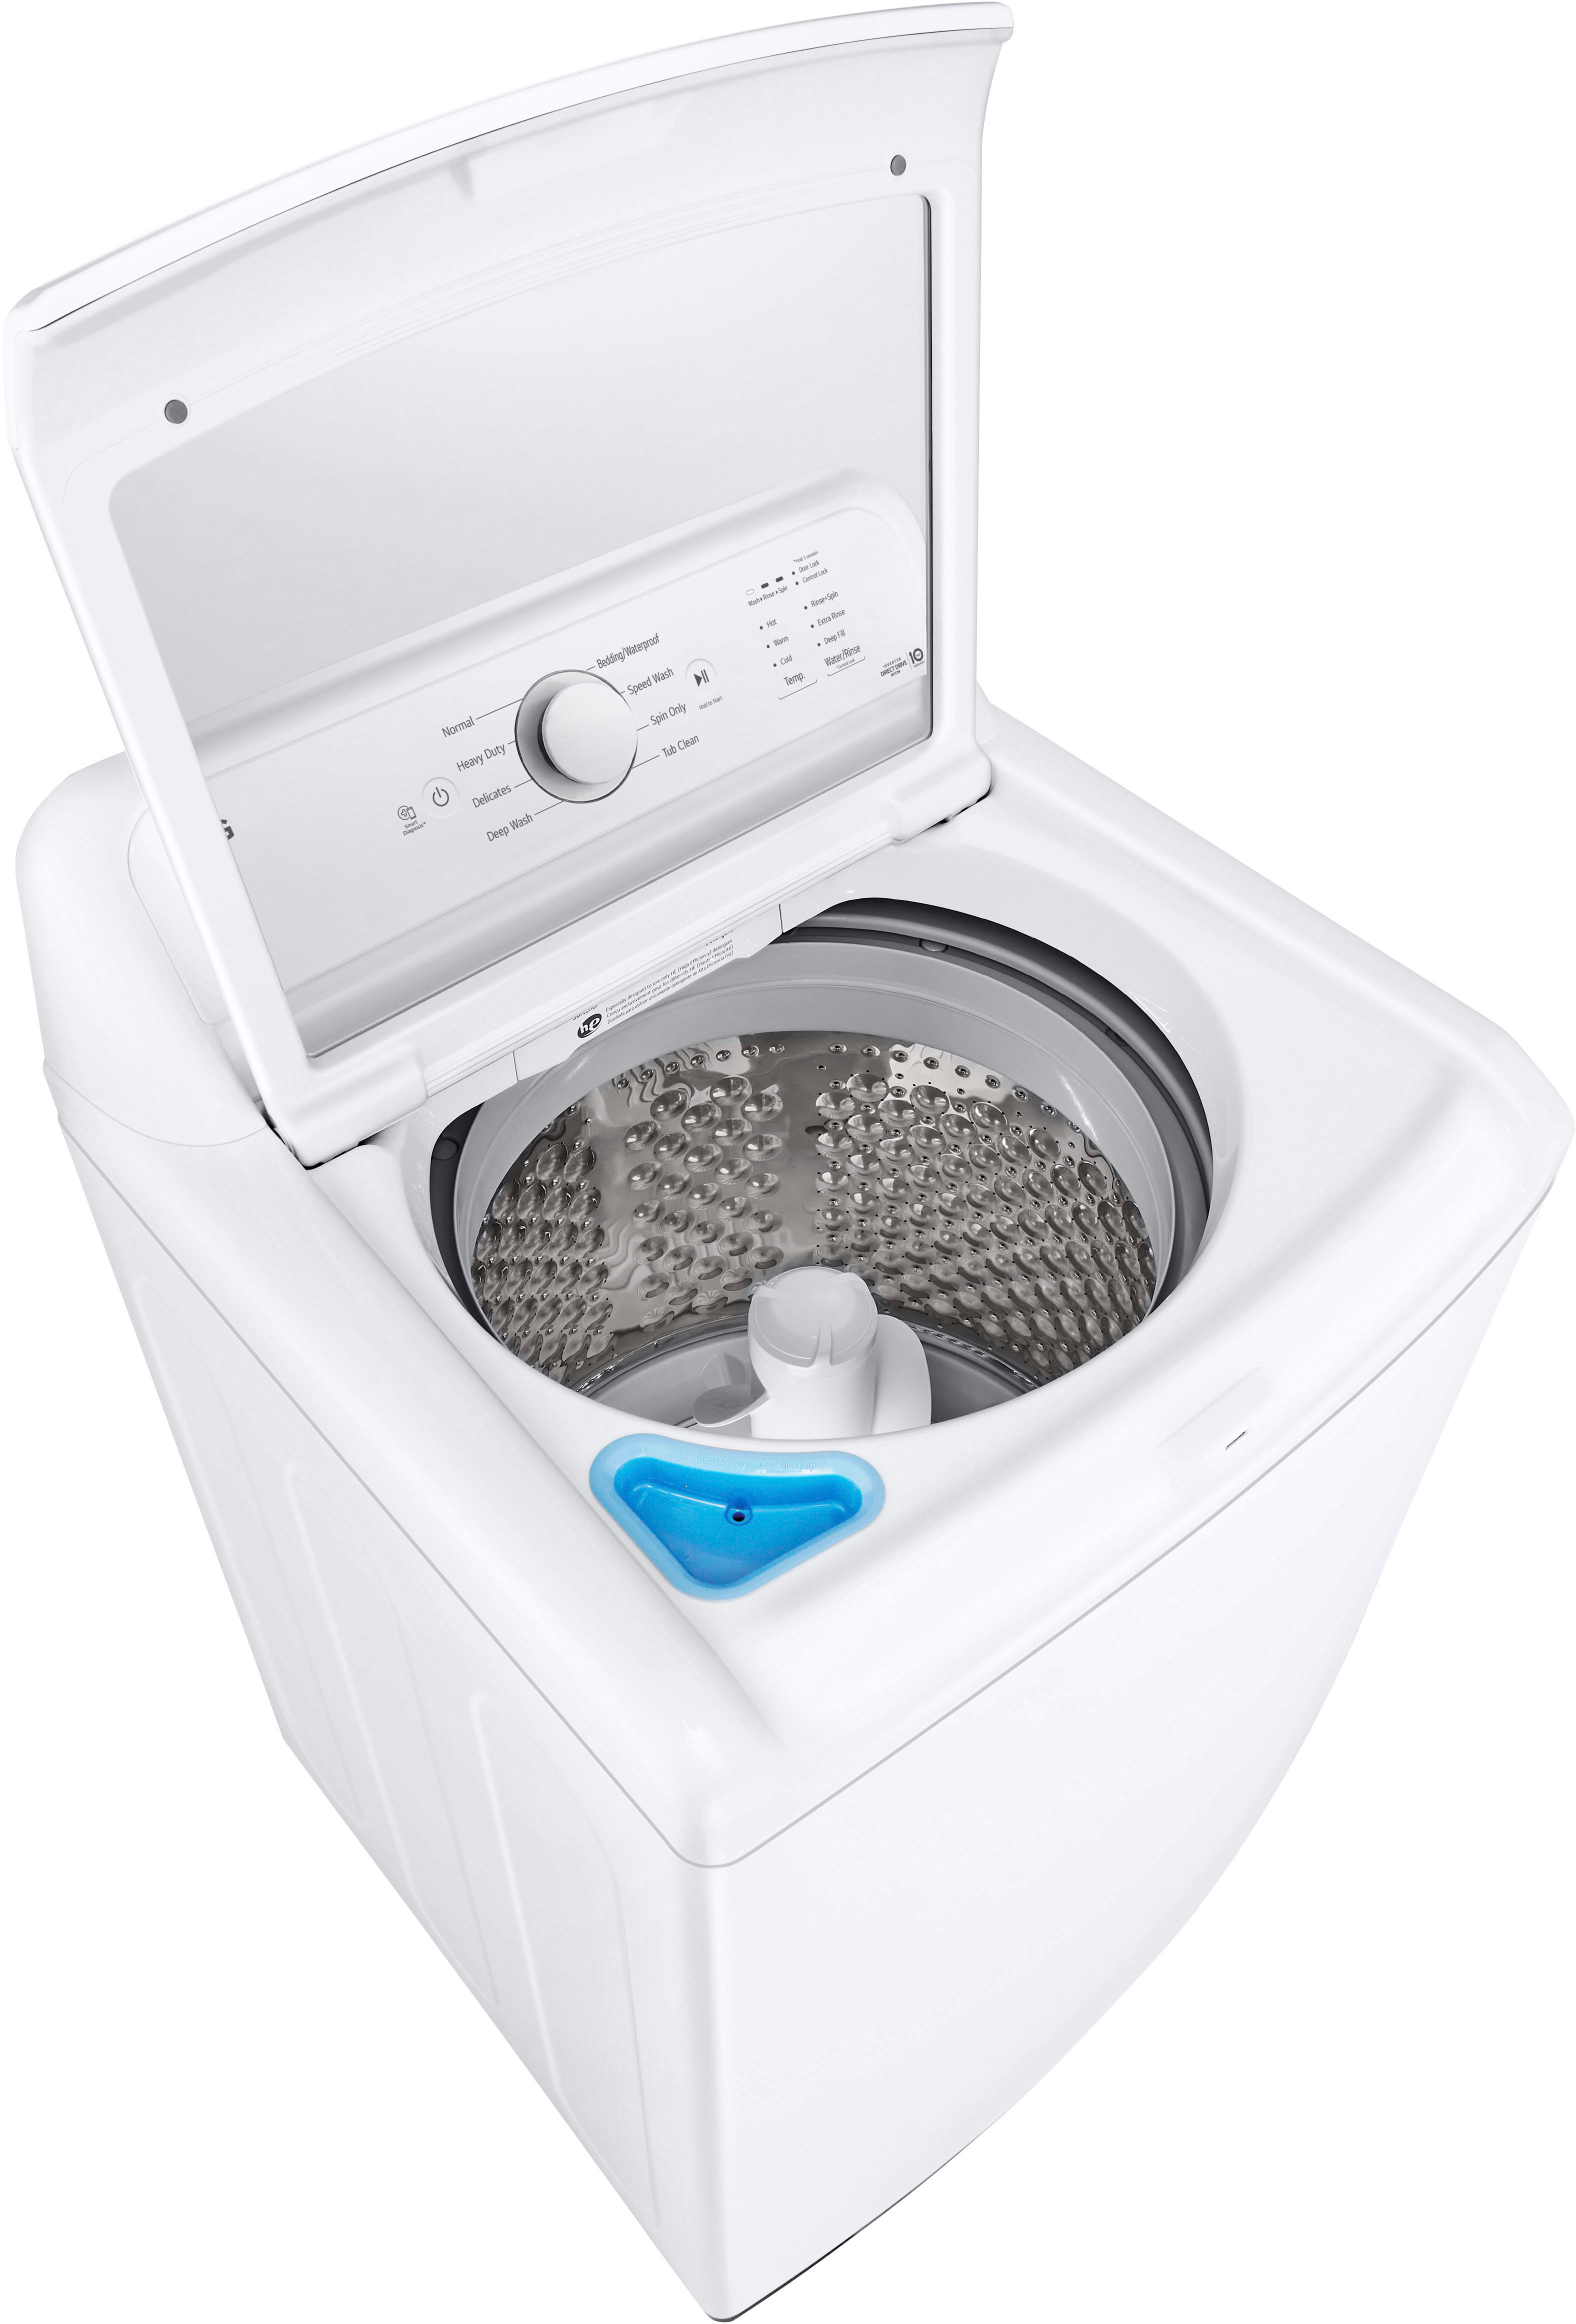 LG Top Best with White Cu. Glass Lid SlamProof WT6105CW Load Washer Buy - 4.1 Ft.